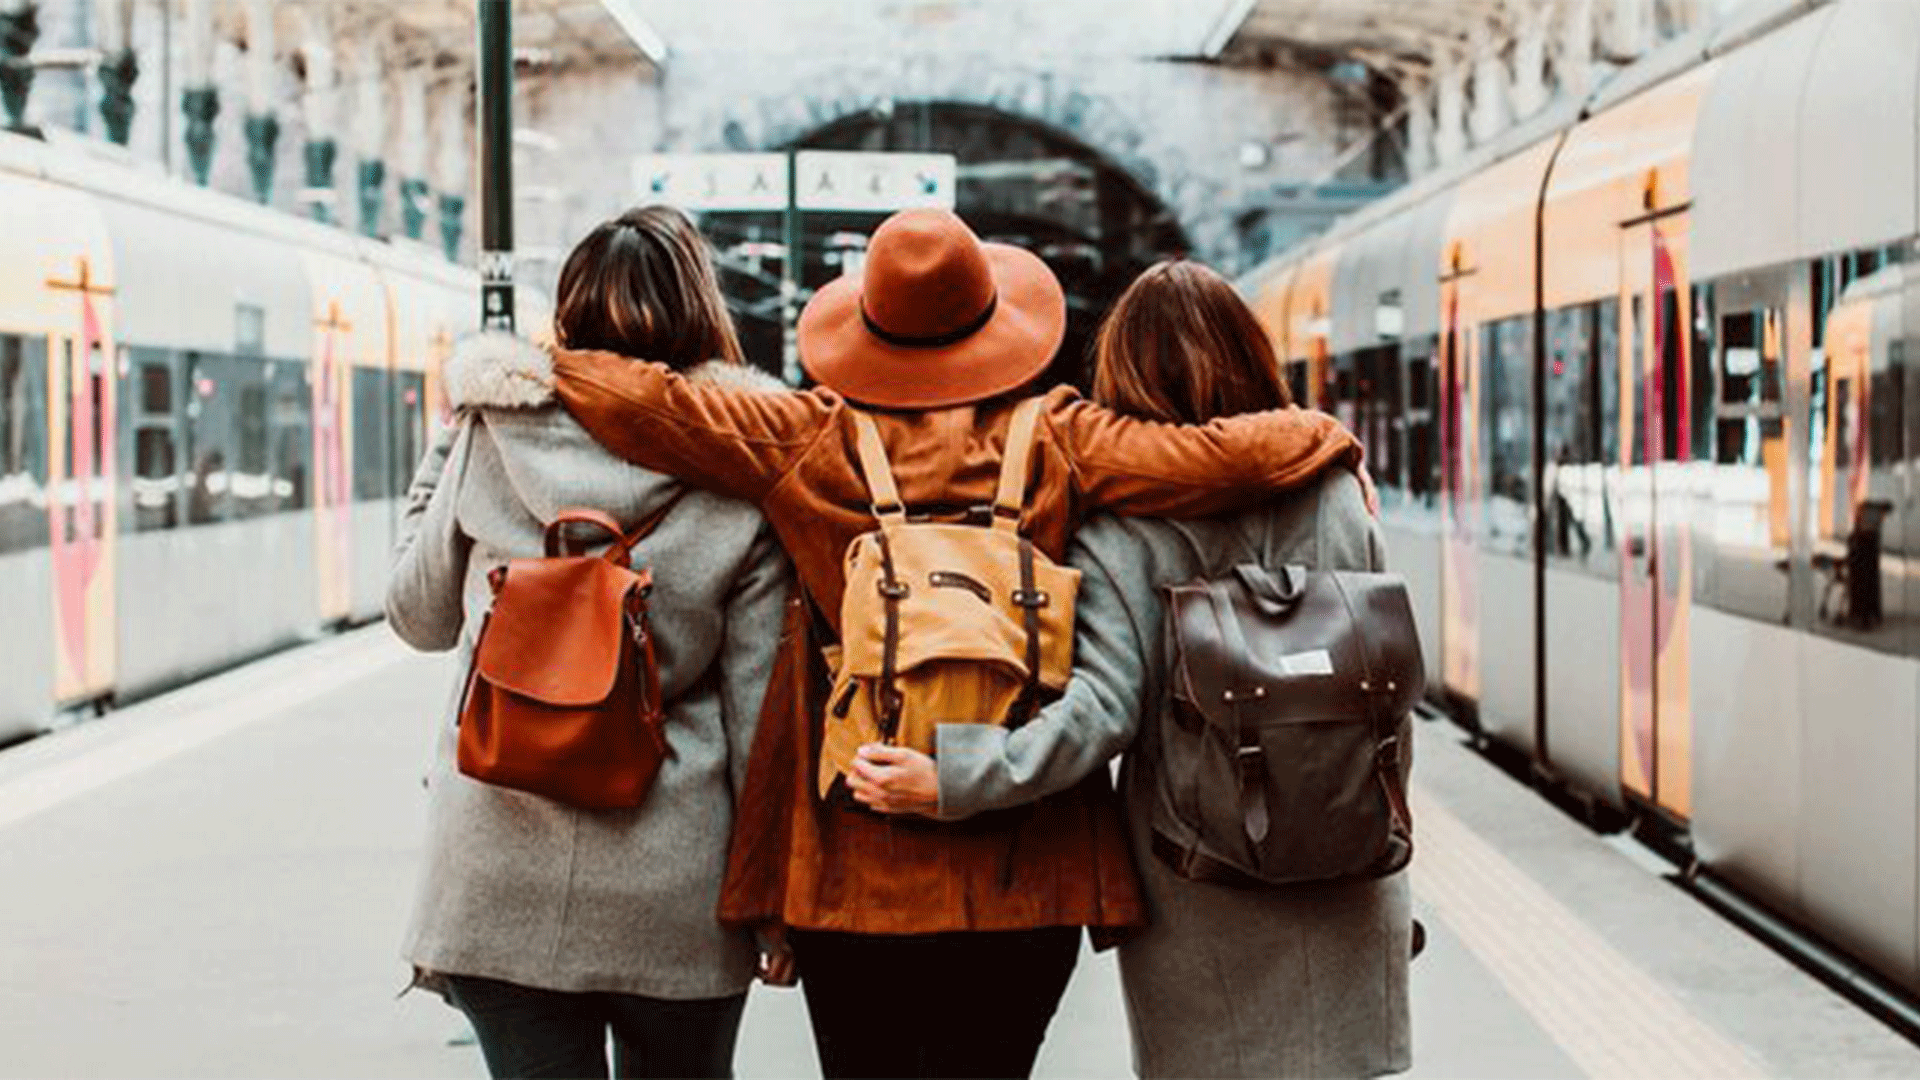 group-of-friends-at-train-station